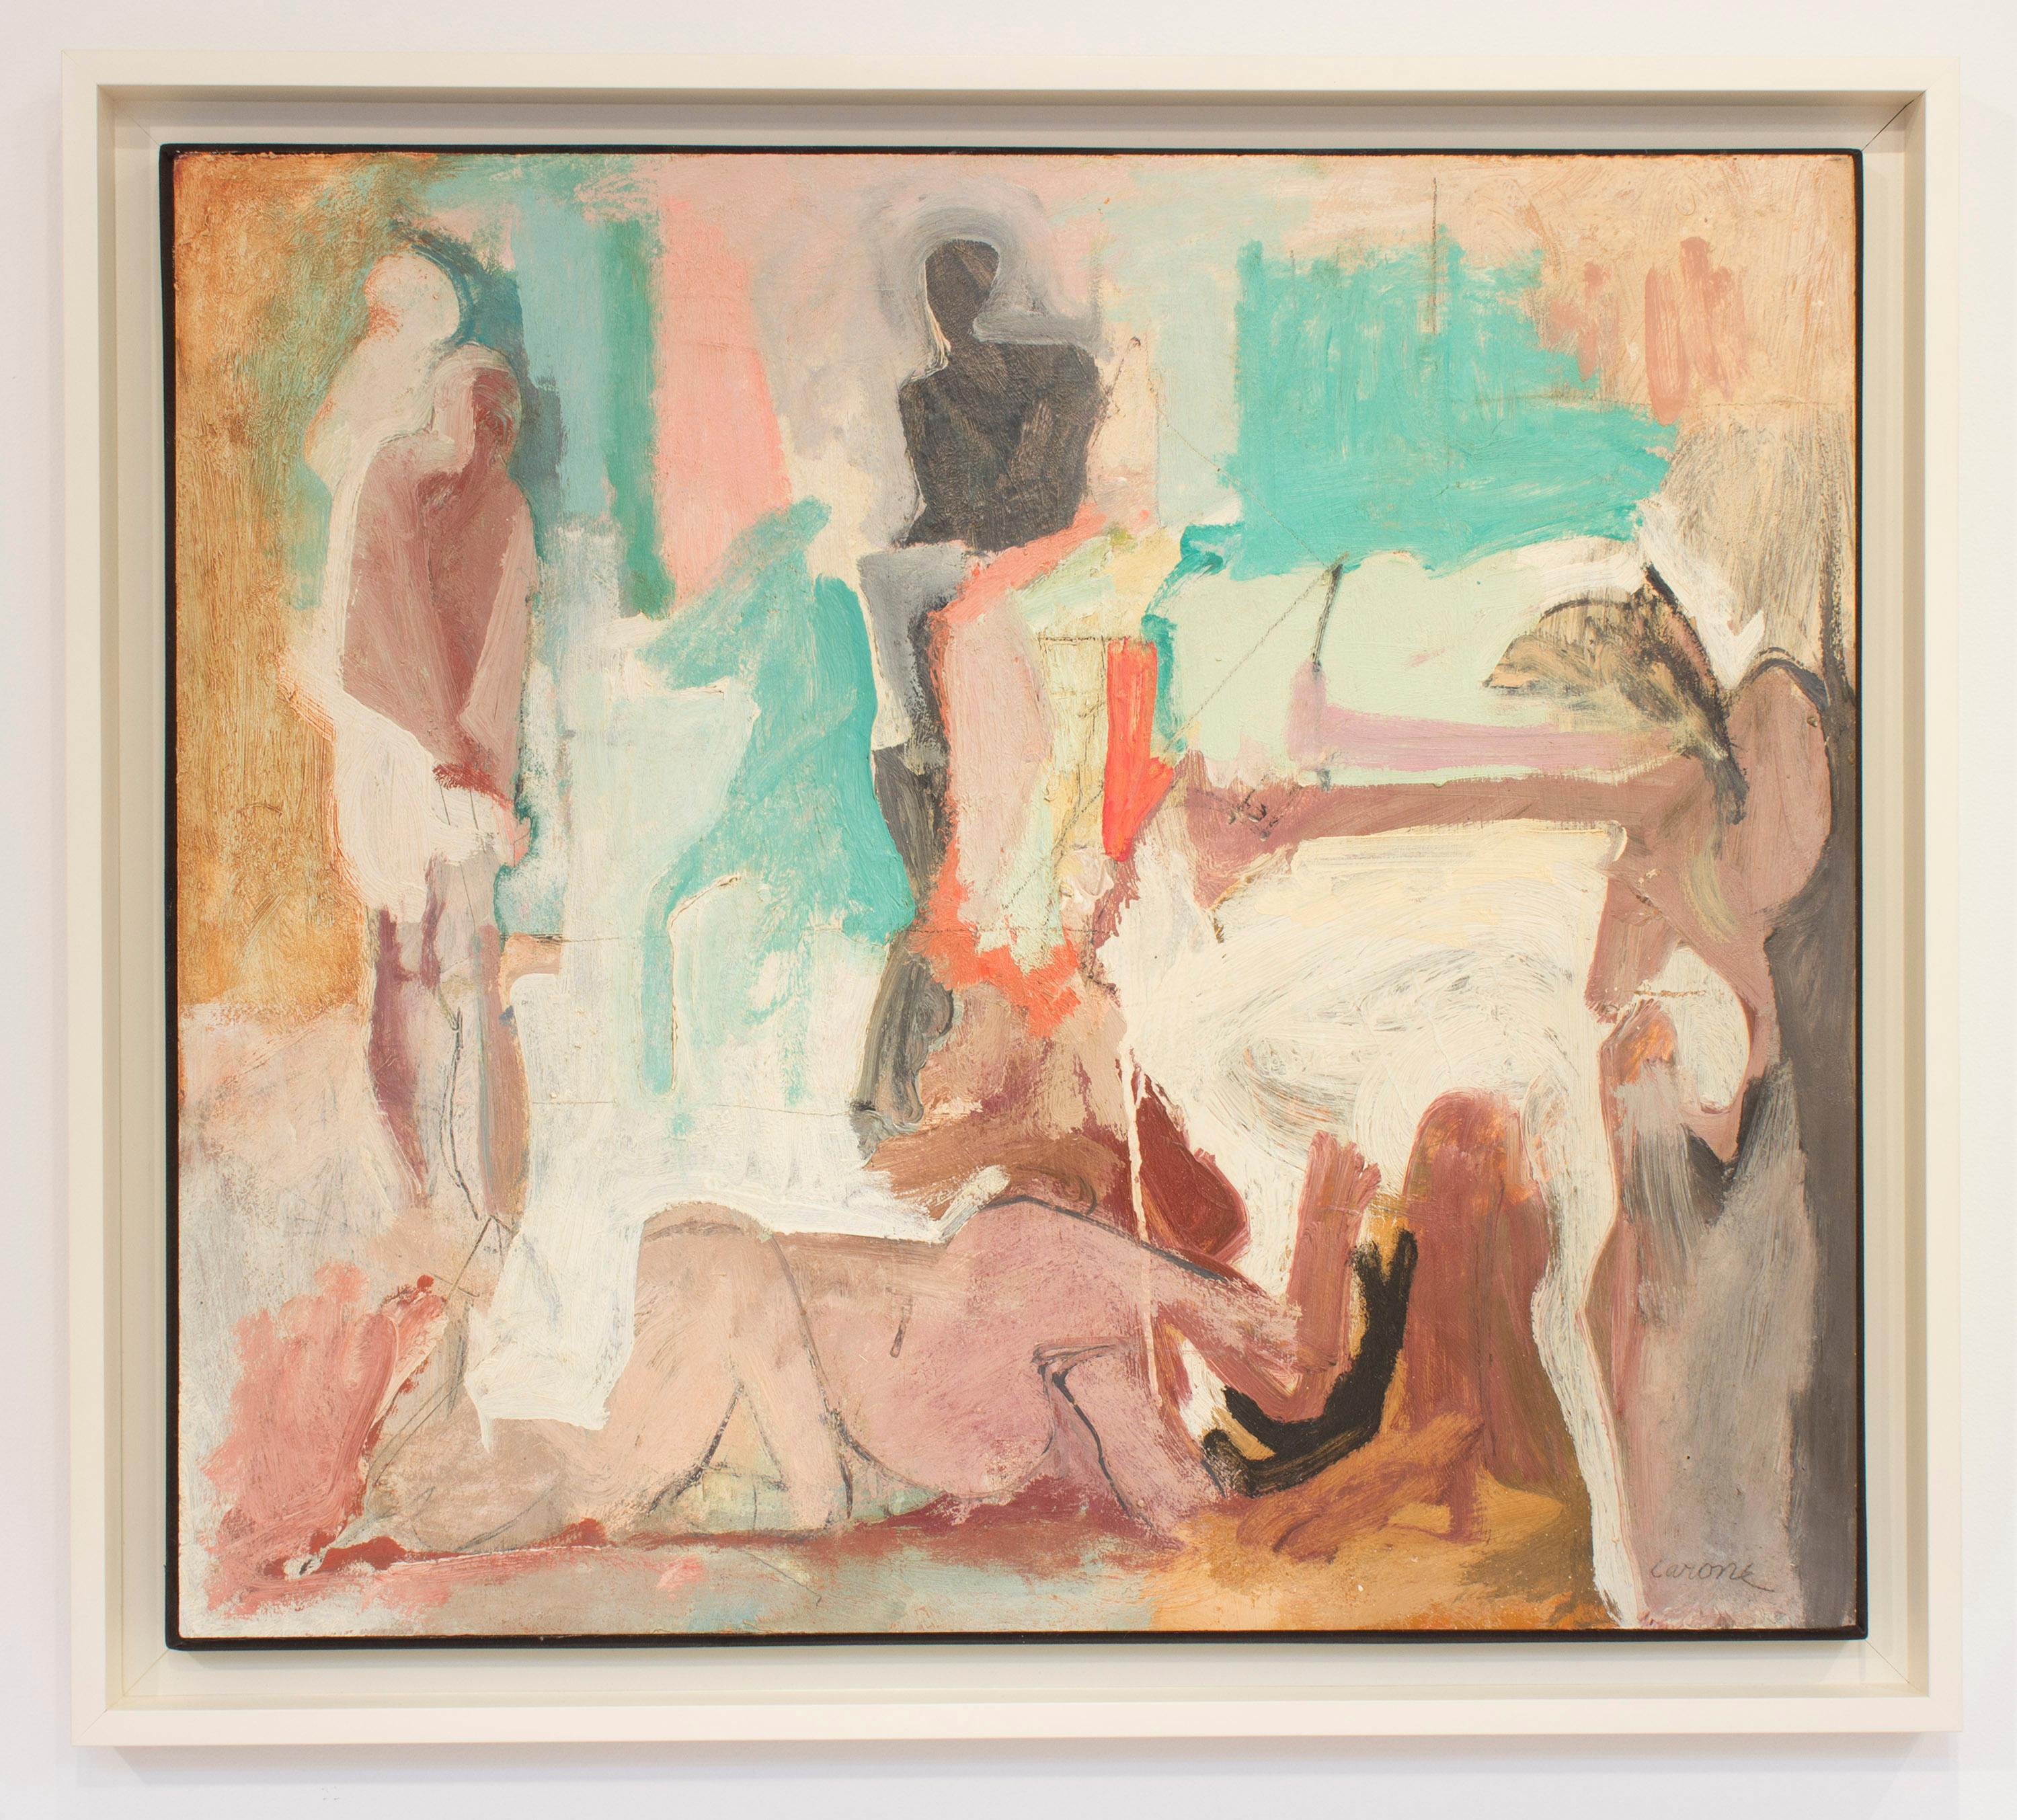 This is an abstracted figurative oil painting by Nicolas Carone titled 'Untitled (P-2824-S),' which is from 1961,. 'Untitled (P-2824-S)' is a beautiful composition of solft colors through which can be read reclining figures; a lone, dark figure